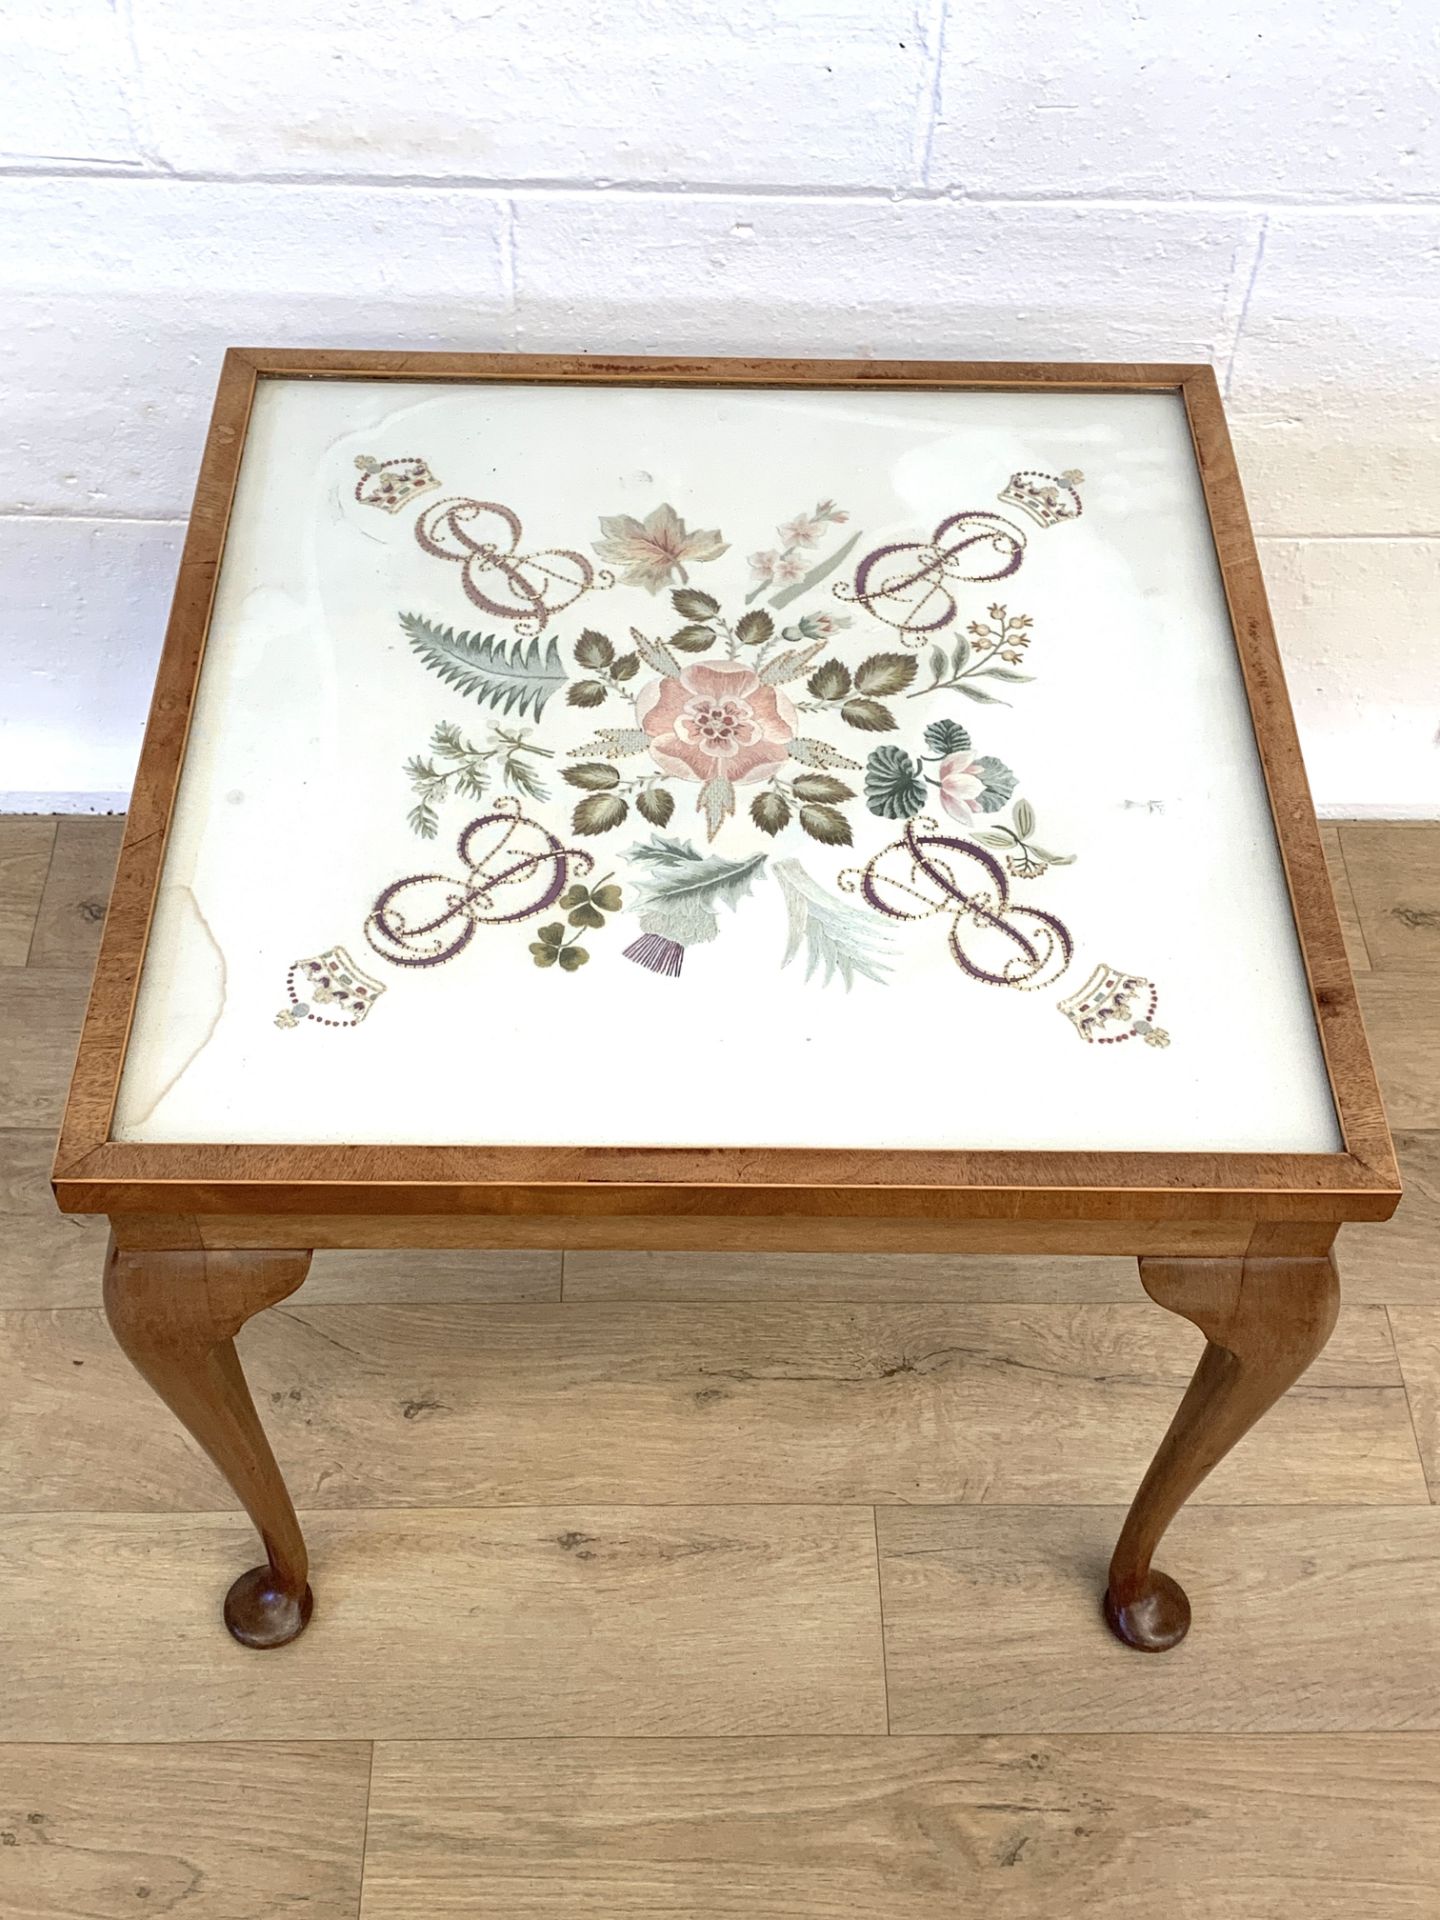 Mahogany framed side table with glazed embroidered panel to top - Image 3 of 5